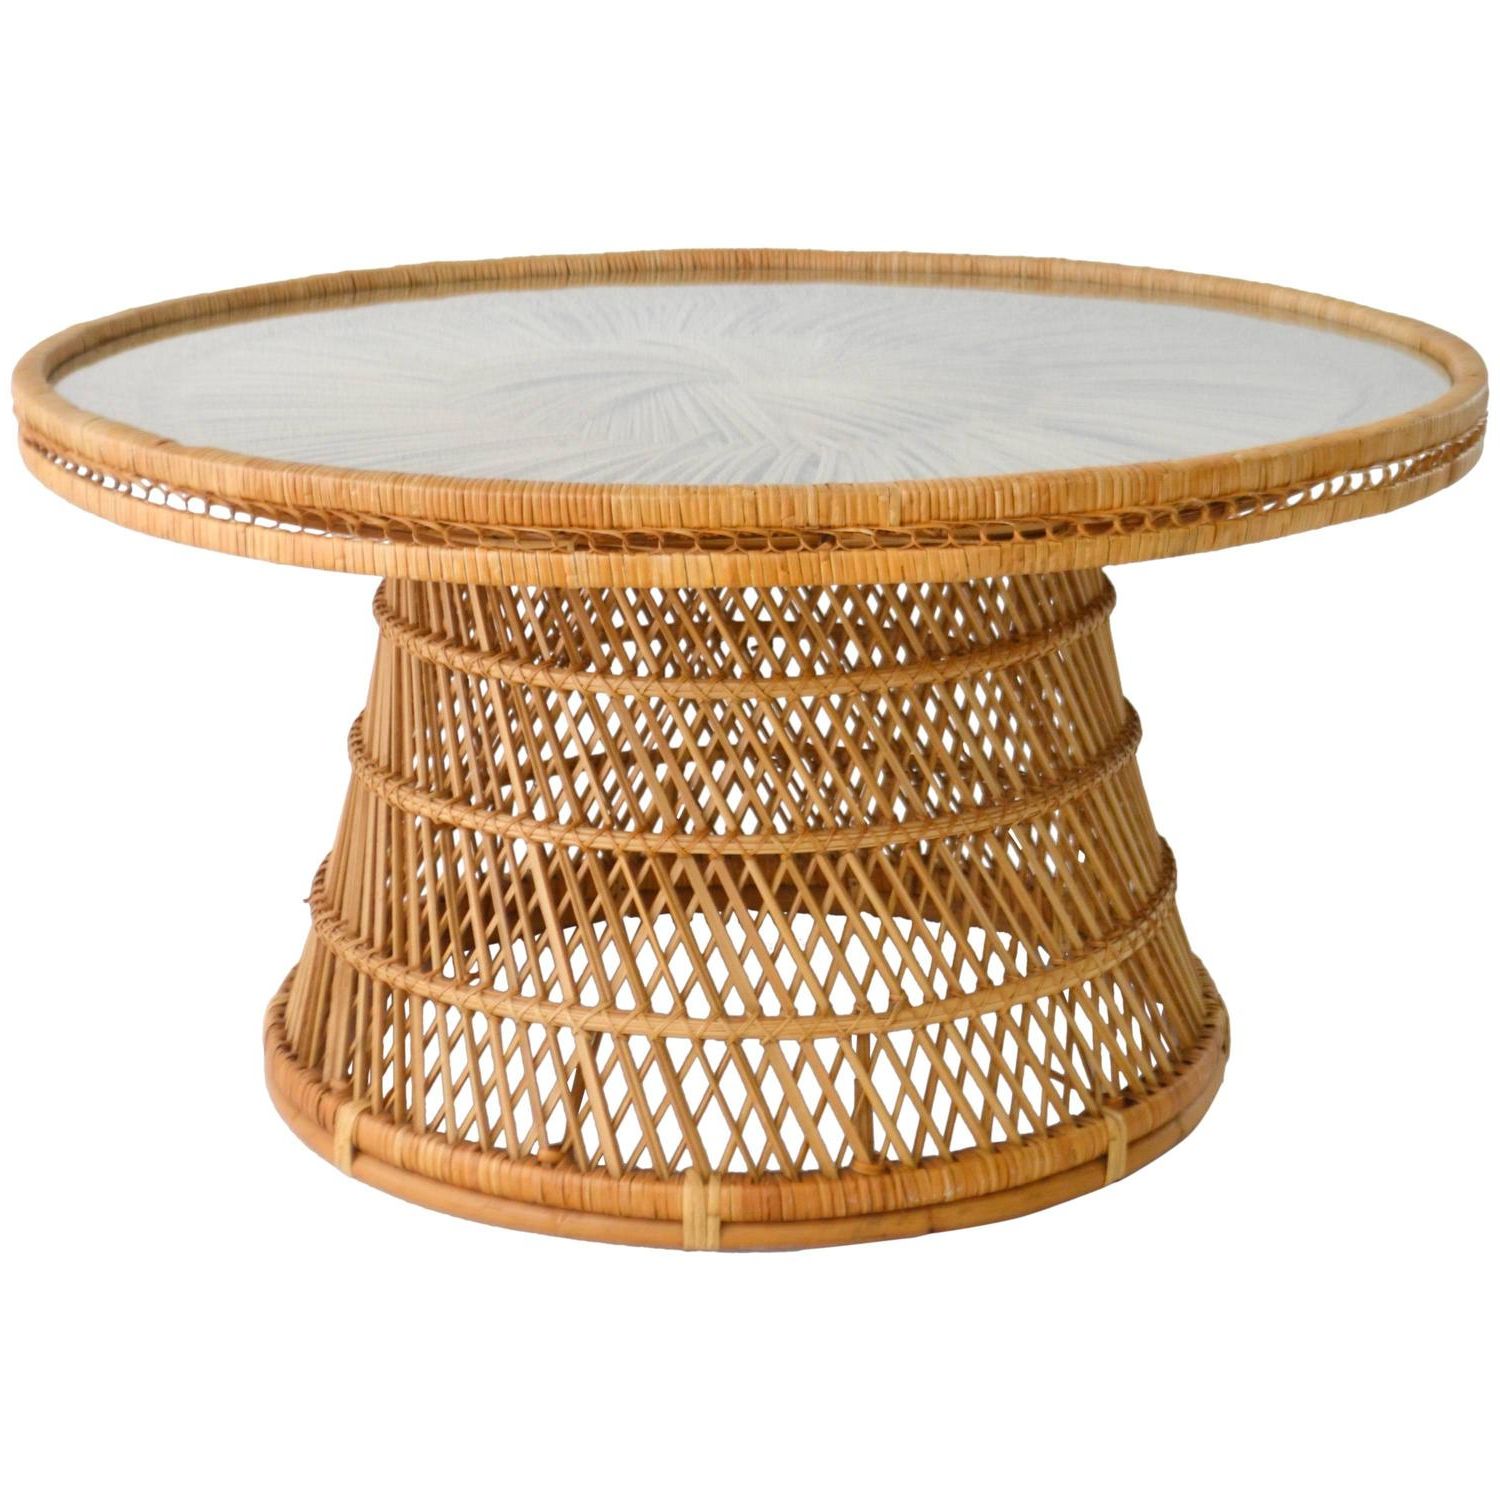 Well Known Natural Woven Banana Coffee Tables Throughout Mid Century Woven Rattan Coffee Table/cocktail Table For (View 3 of 20)